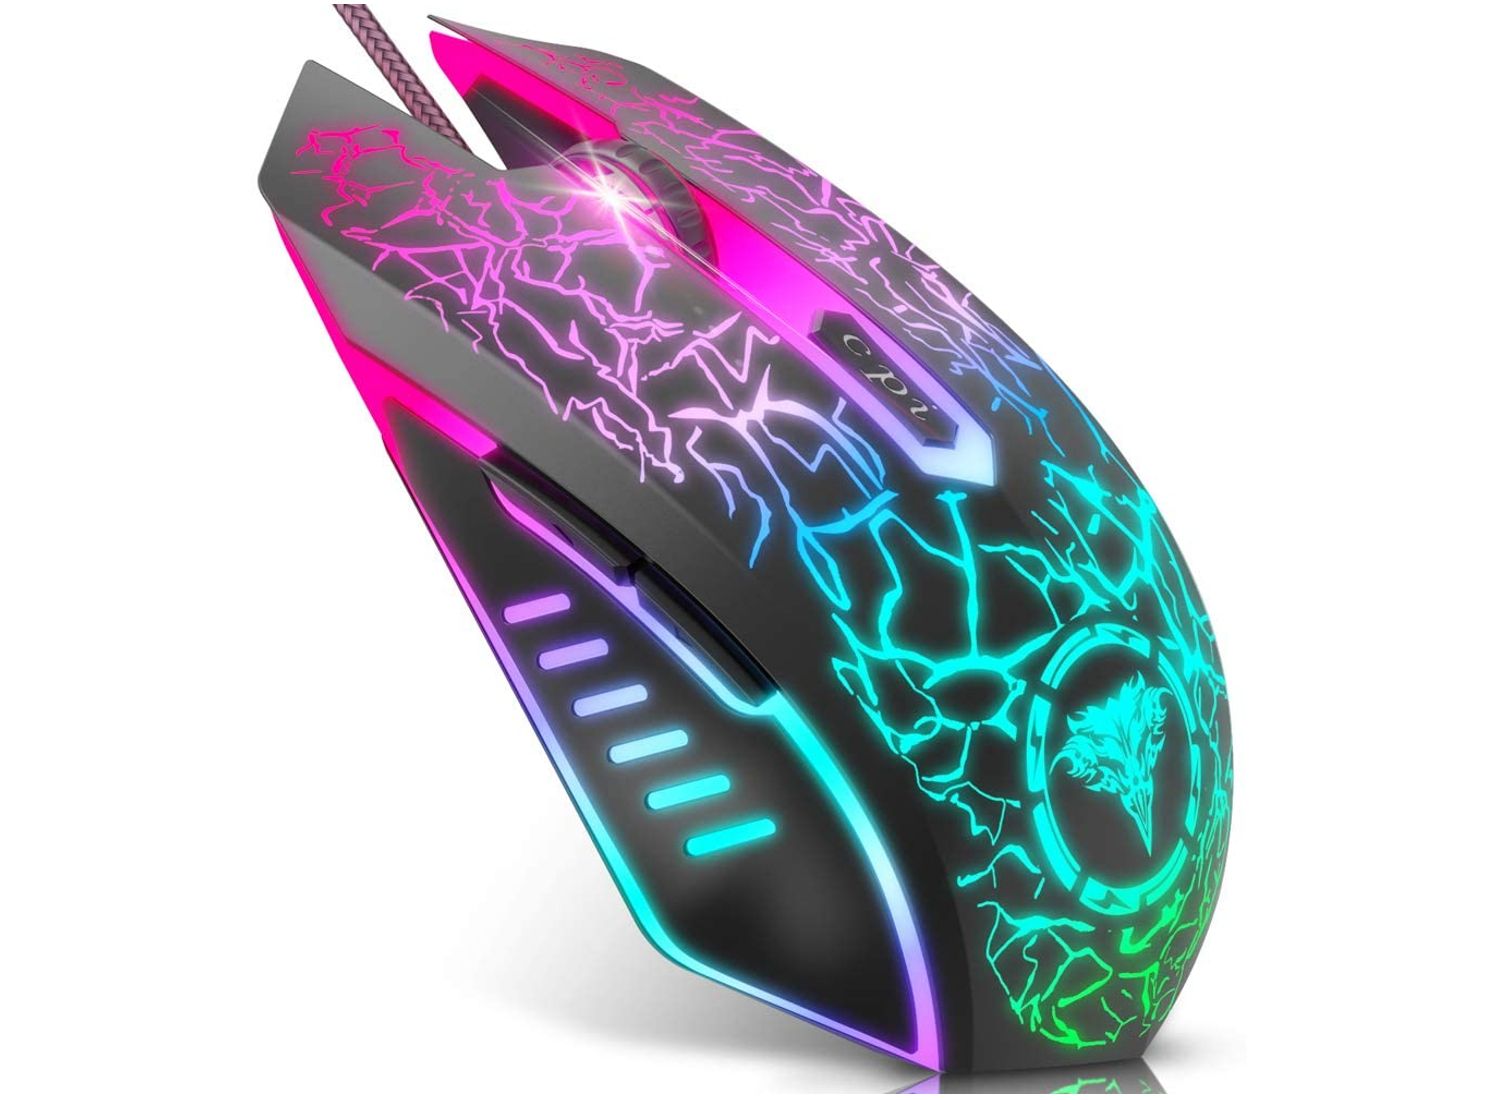 How To Change The Color Of The Light In The Uhuru Wireless Gaming Mouse